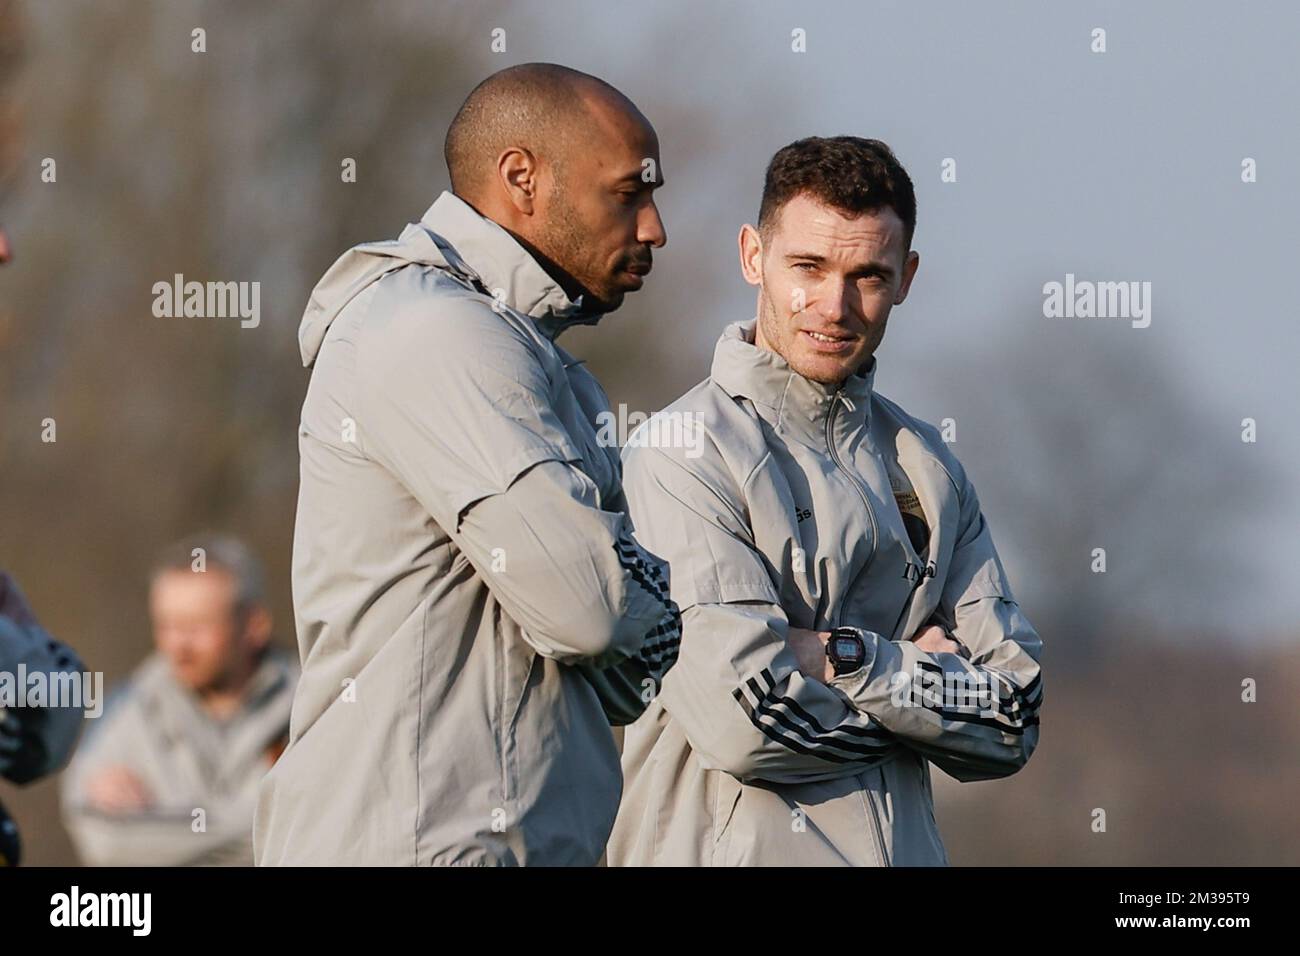 Belgium's assistant coach Thierry Henry and Belgium's Thomas Vermaelen pictured during a training session of the Royal Belgian Football Association (RBFA), Thursday 24 March 2022 in Tubize, during the preparations for the friendly games against and in Ireland (26/03) and against Burkina Faso (29/03). BELGA PHOTO BRUNO FAHY Stock Photo